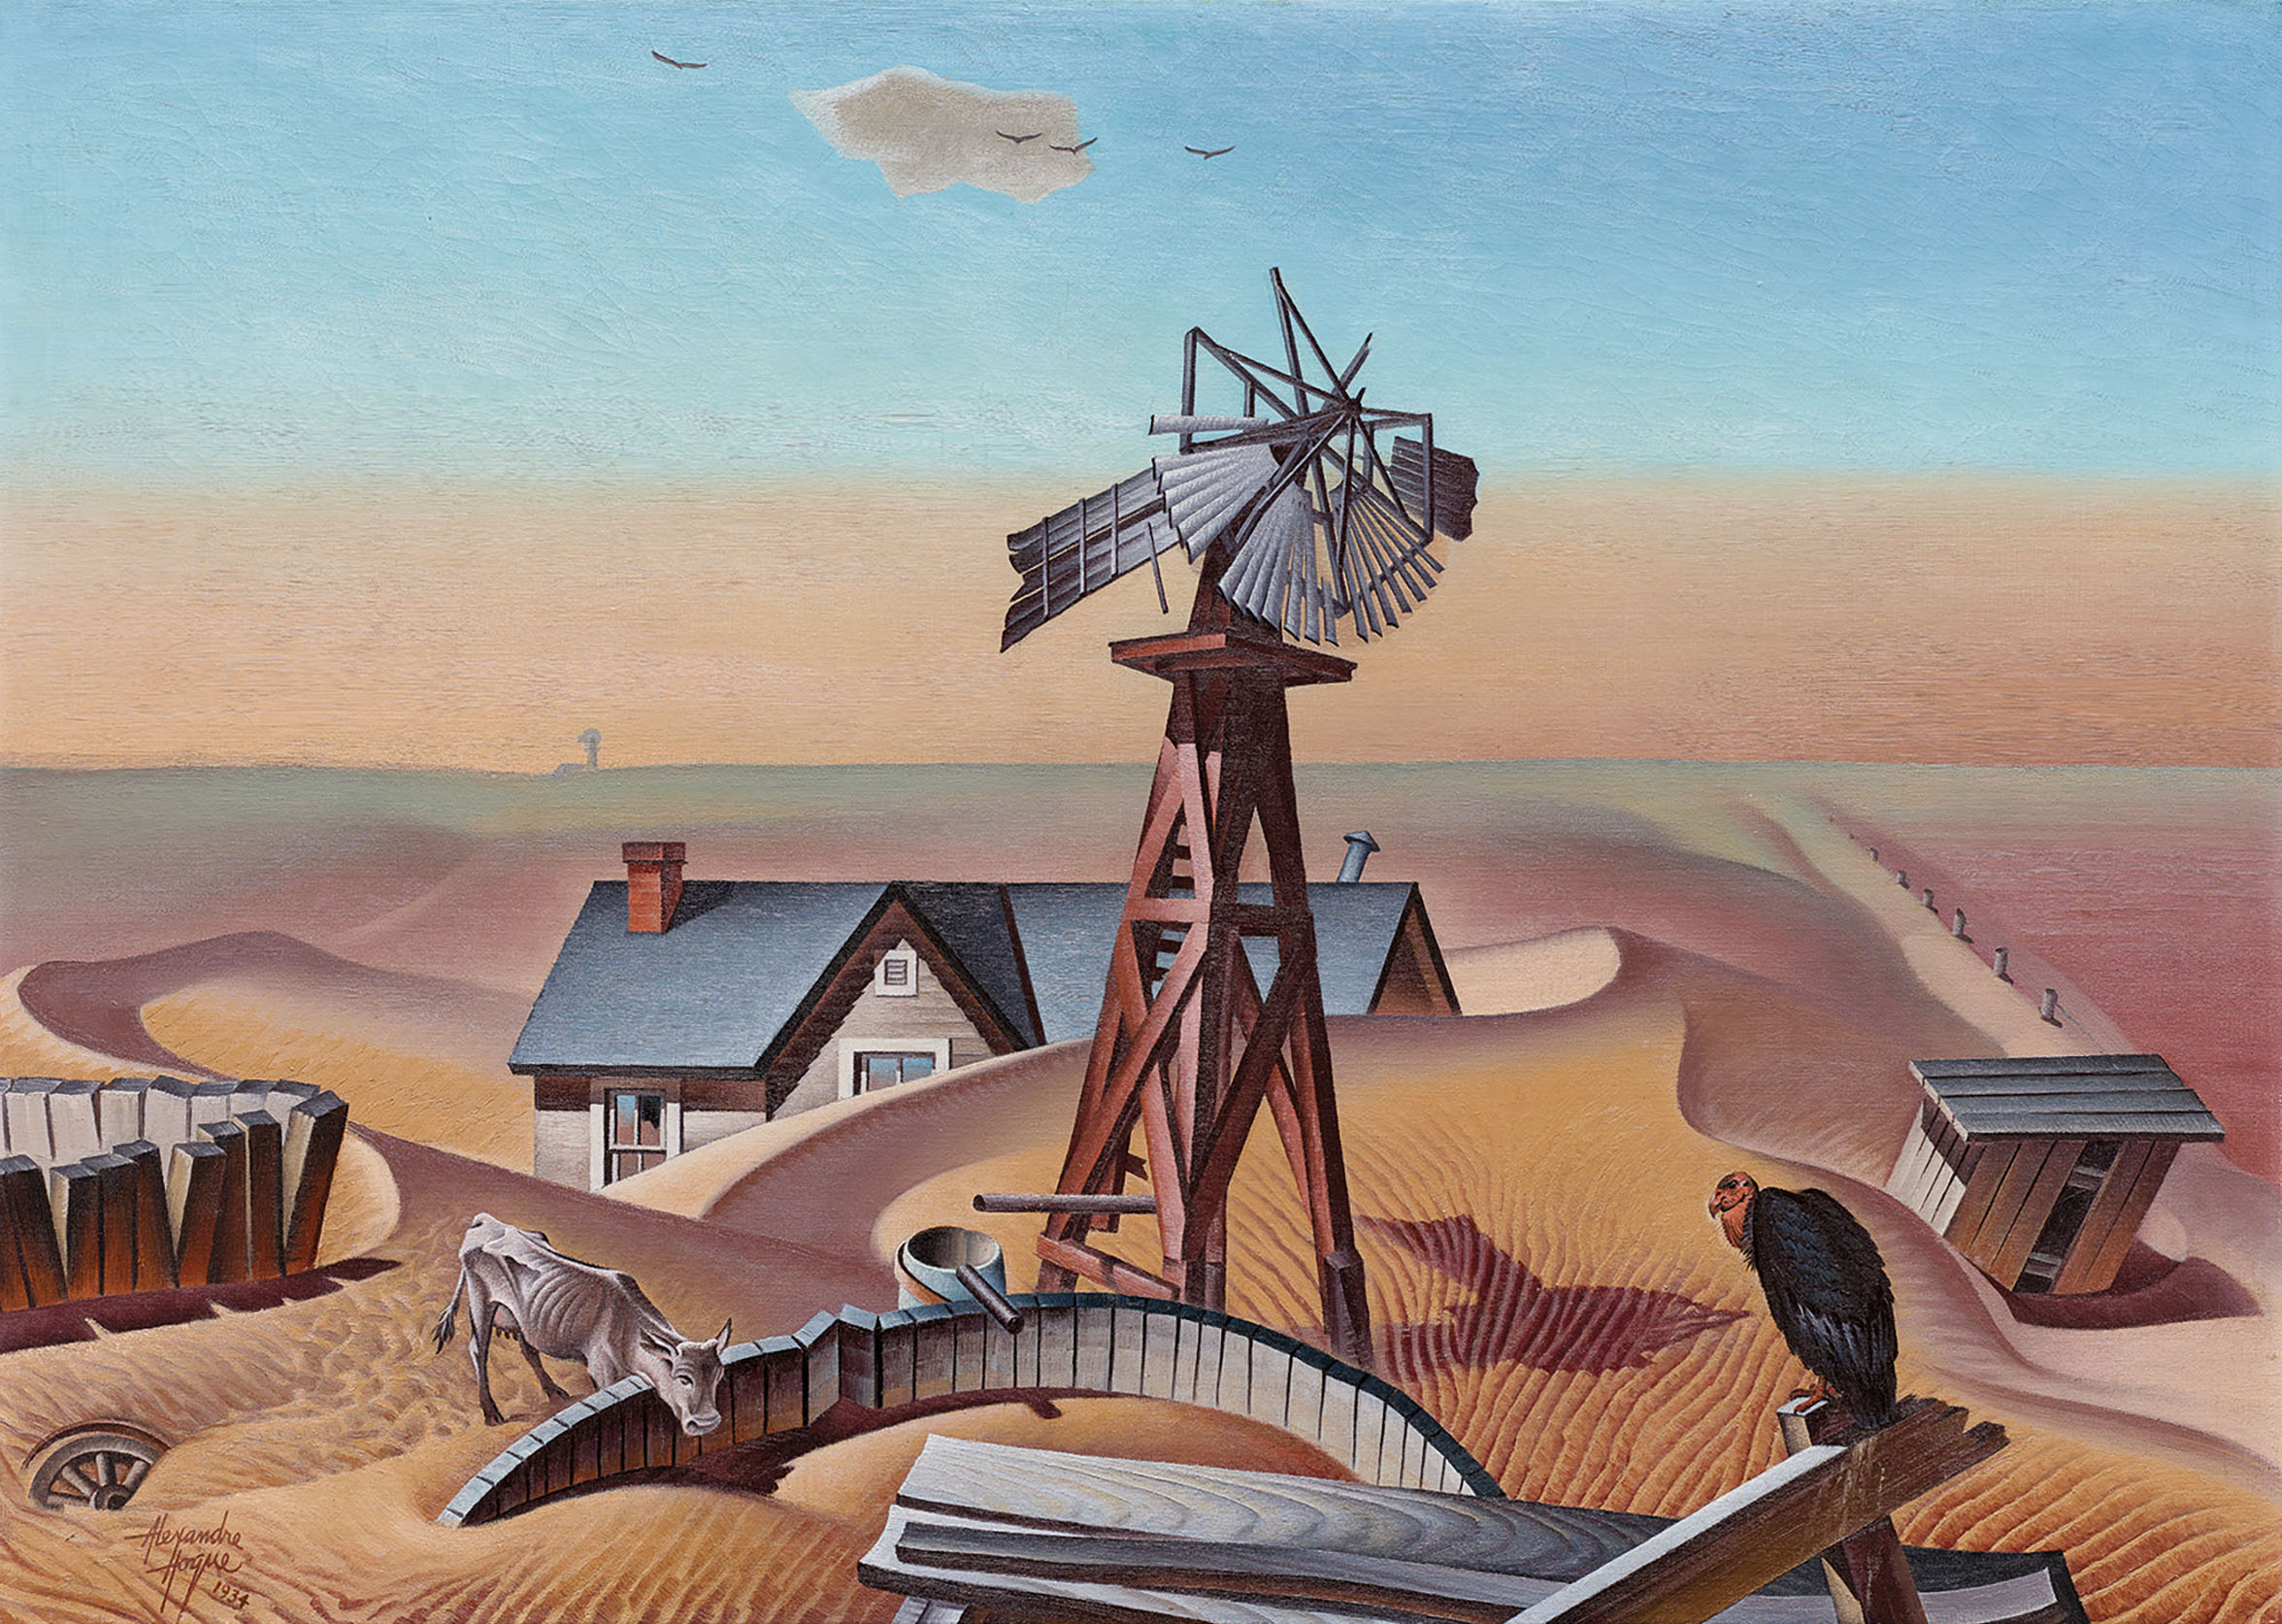 A painting of a windmill and houses on a desert landscape